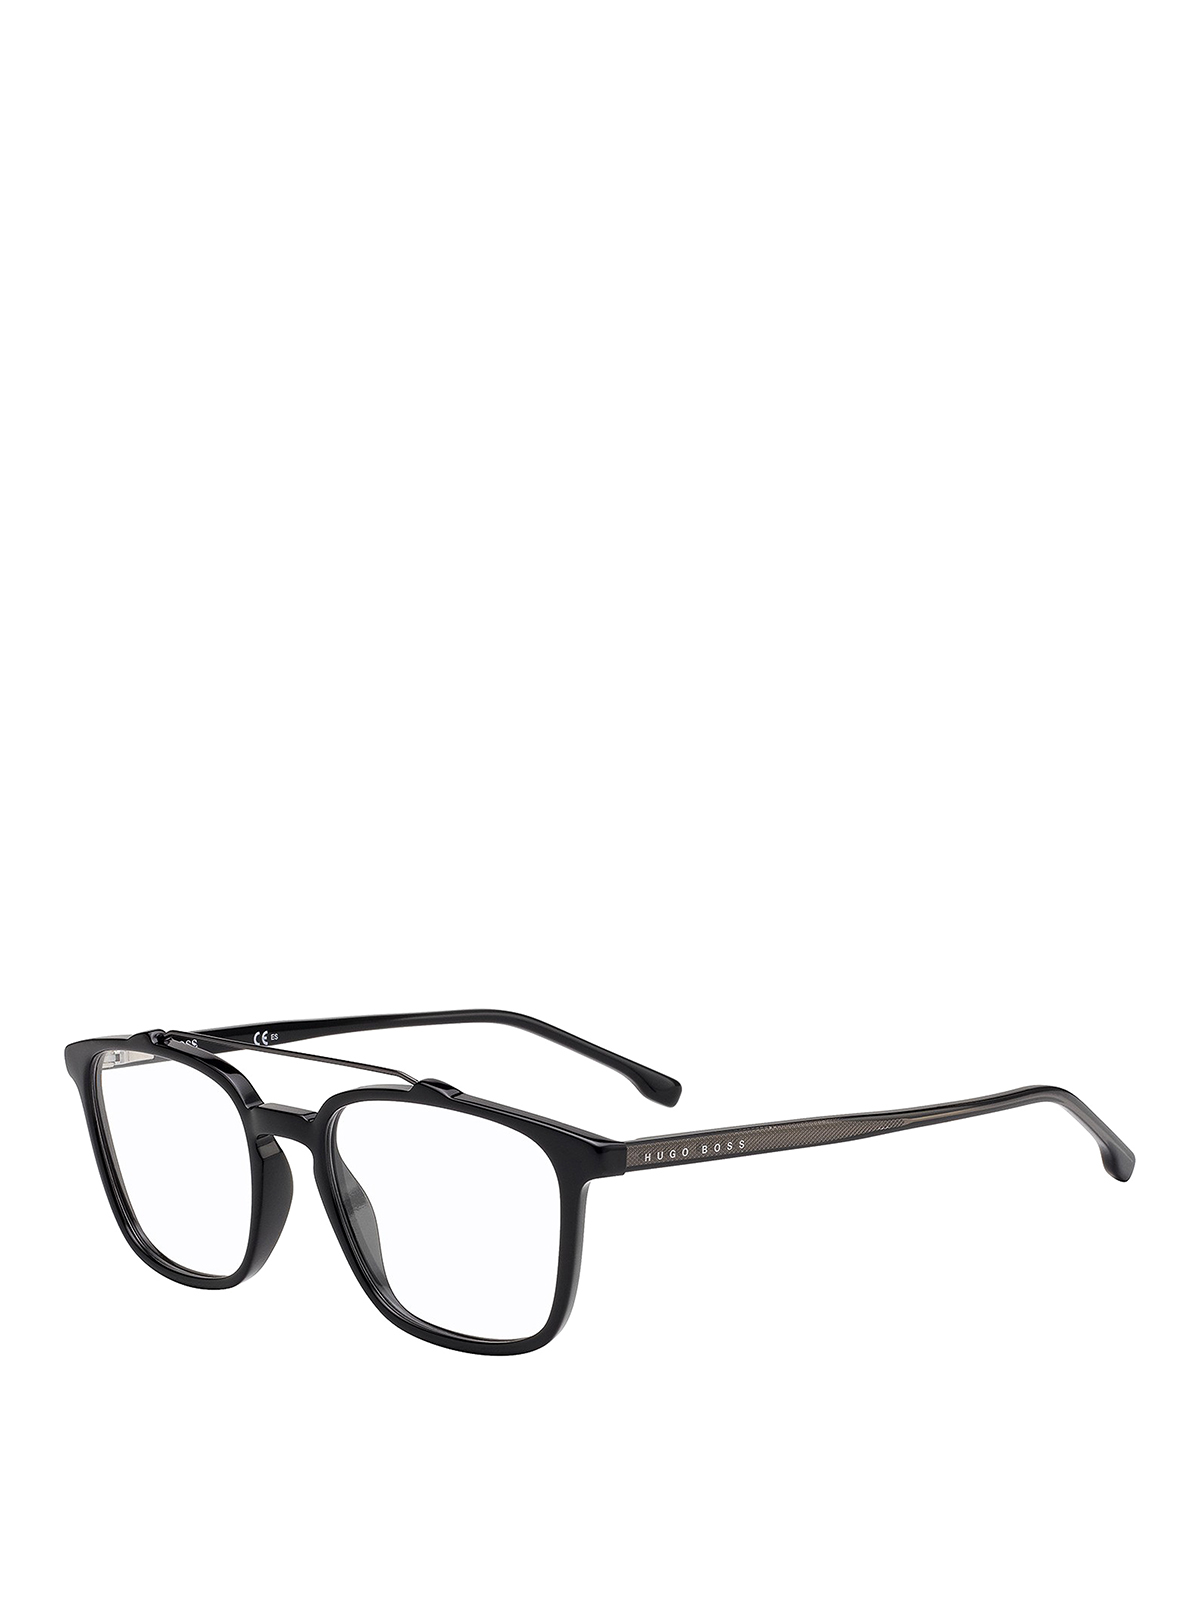 hugo boss optyl glasses Cheaper Than Retail Price\u003e Buy Clothing,  Accessories and lifestyle products for women \u0026 men -